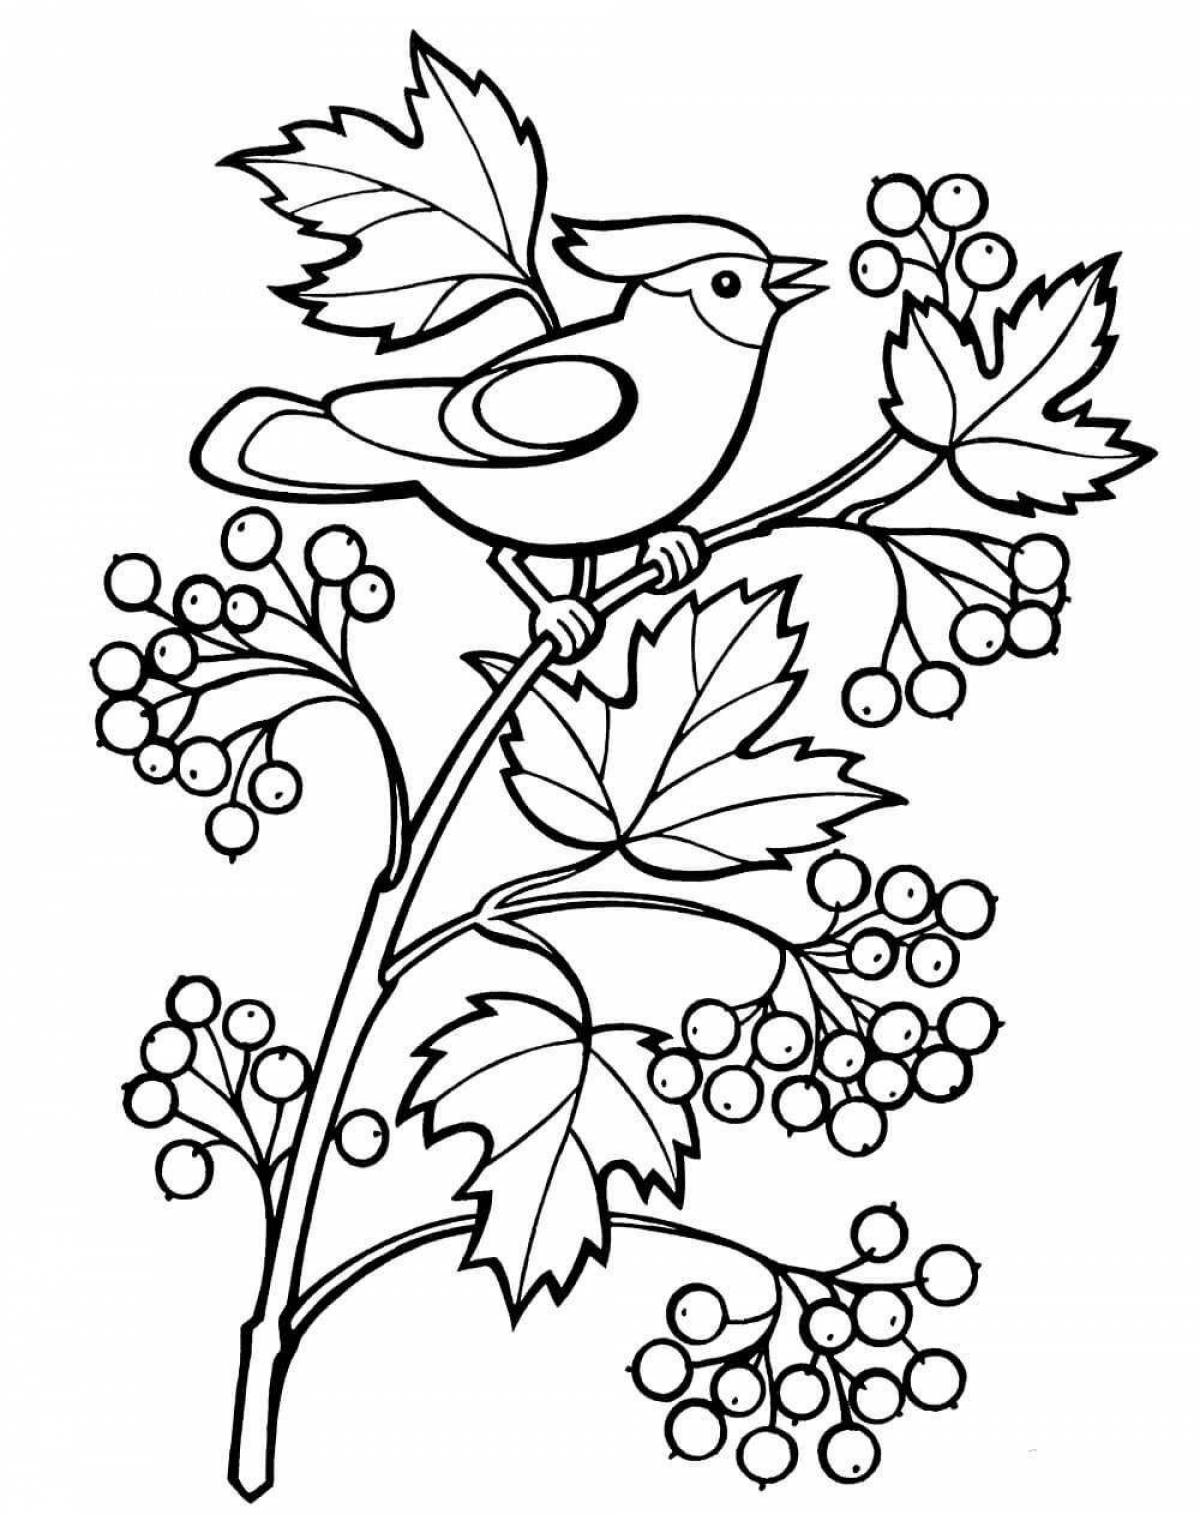 Coloring page attractive rowan berries